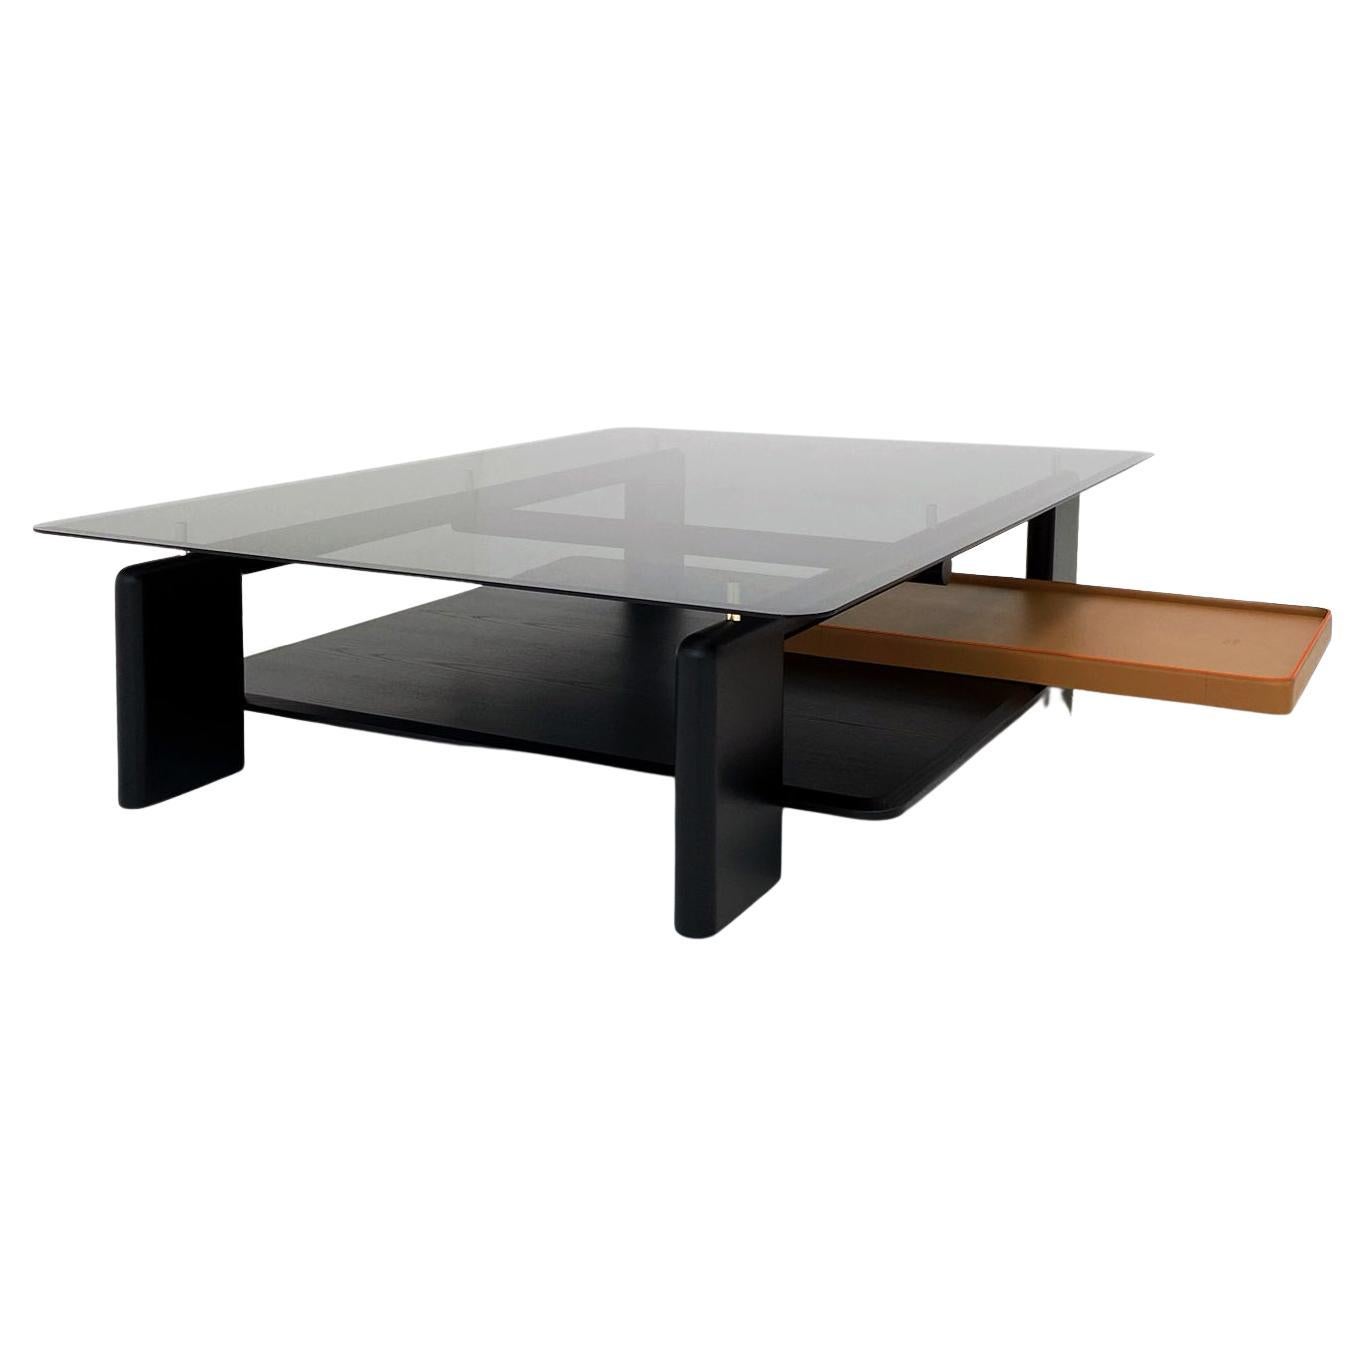 Toro, the luxurious Coffee Table with Leather Tray For Sale